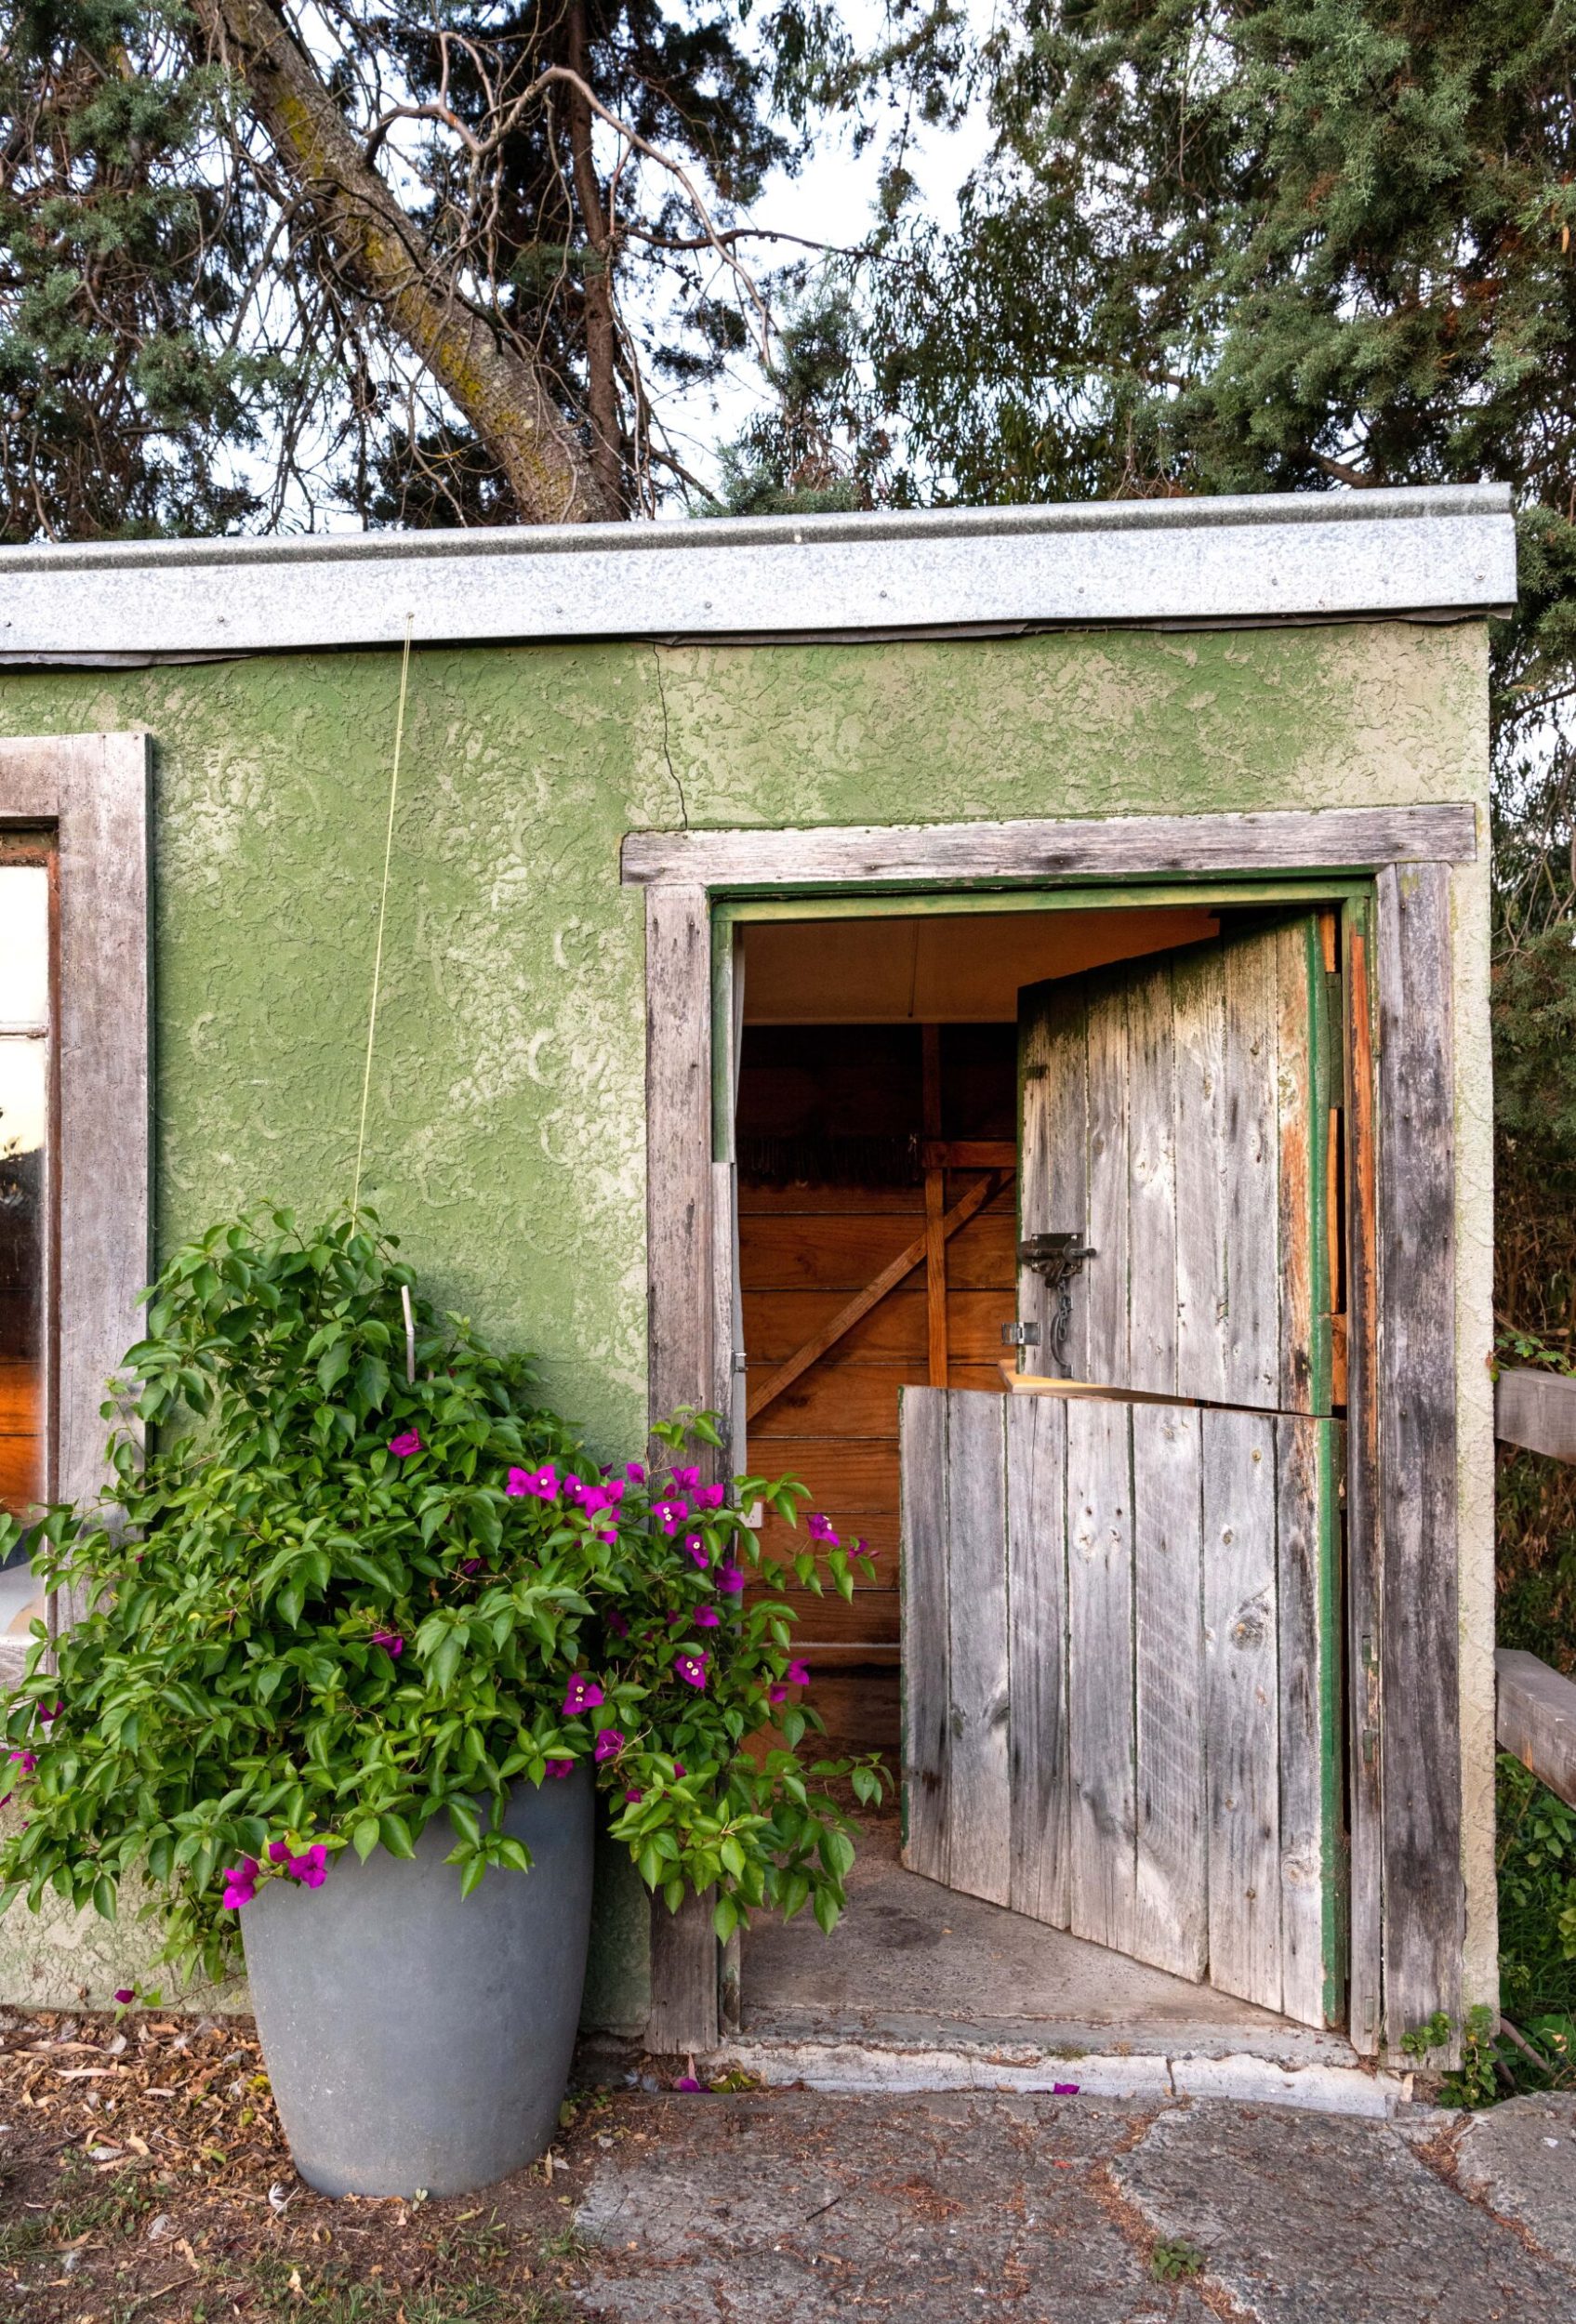 The exterior Dutch doors of a green single story shed